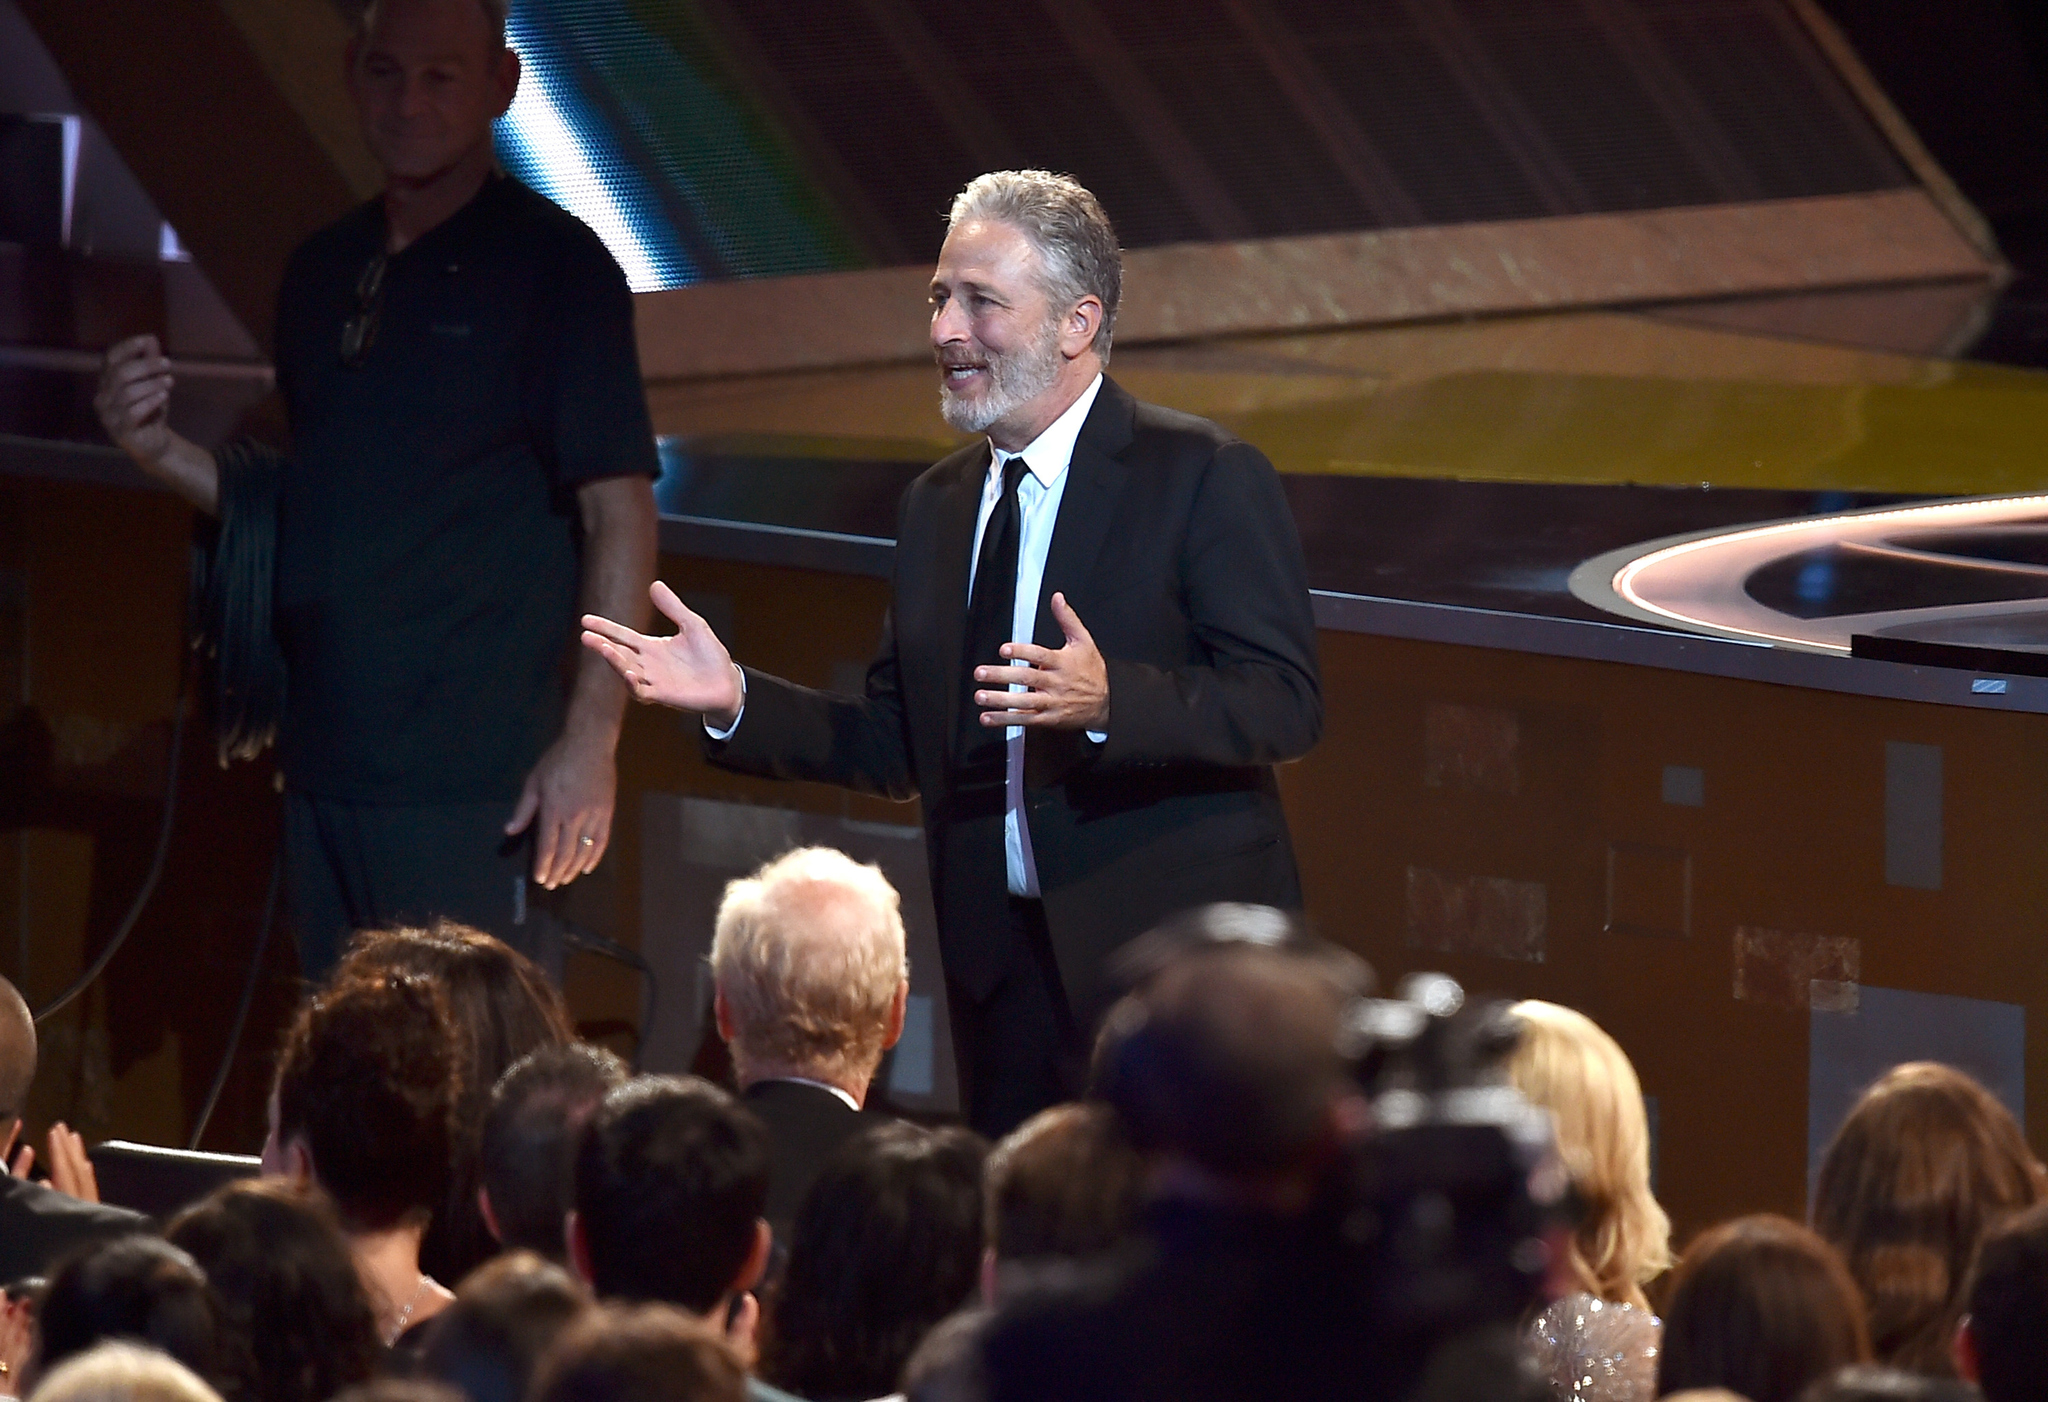 Jon Stewart at event of The 67th Primetime Emmy Awards (2015)